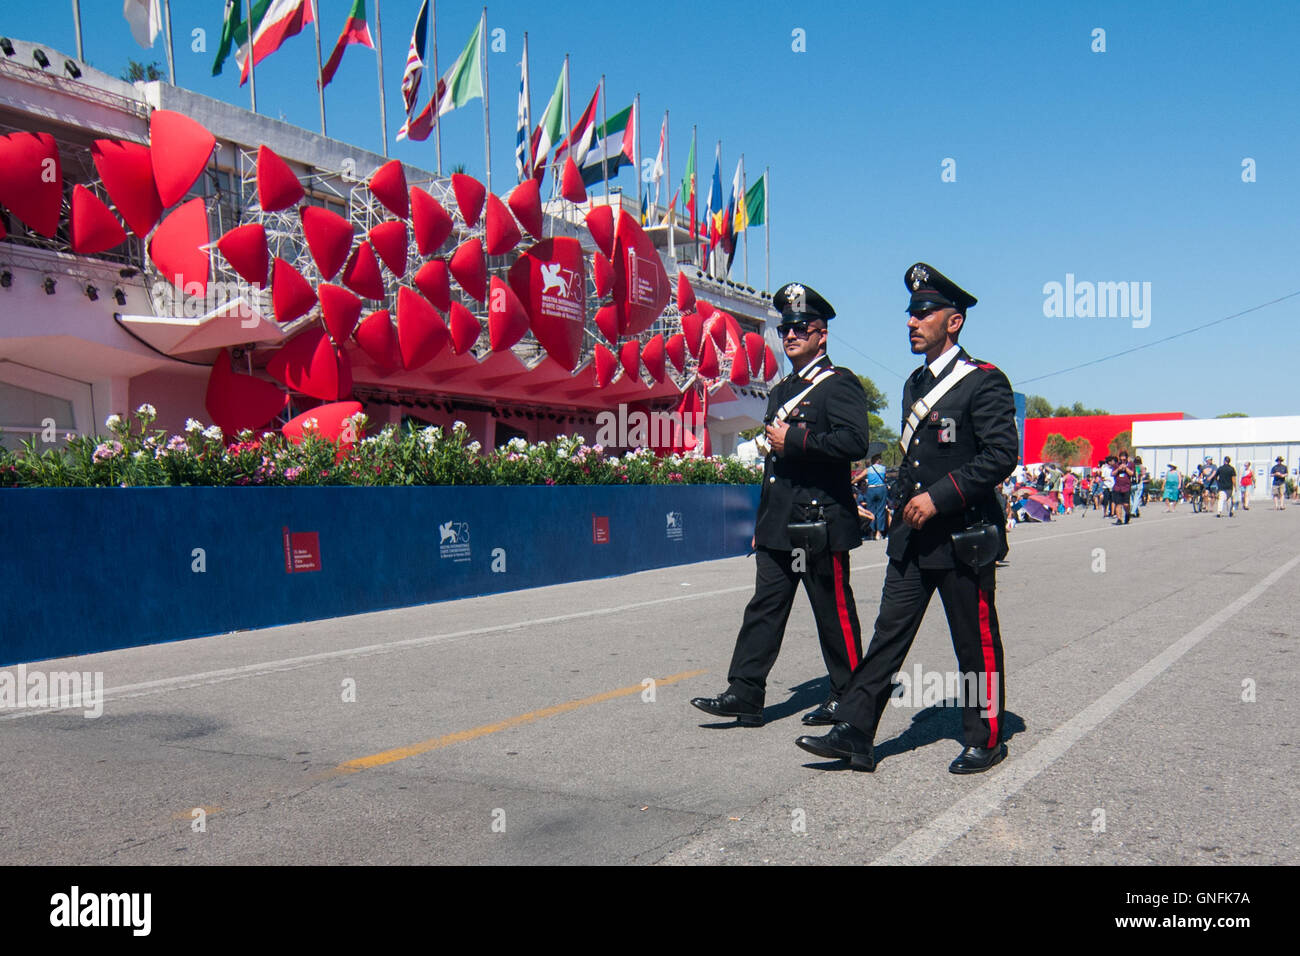 Venice, Italy. 31th August, 2016. Police does a check patrol  at the 73rd Venice Film Festival. Credit:  Simone Padovani / Awakening / Alamy Live News Stock Photo